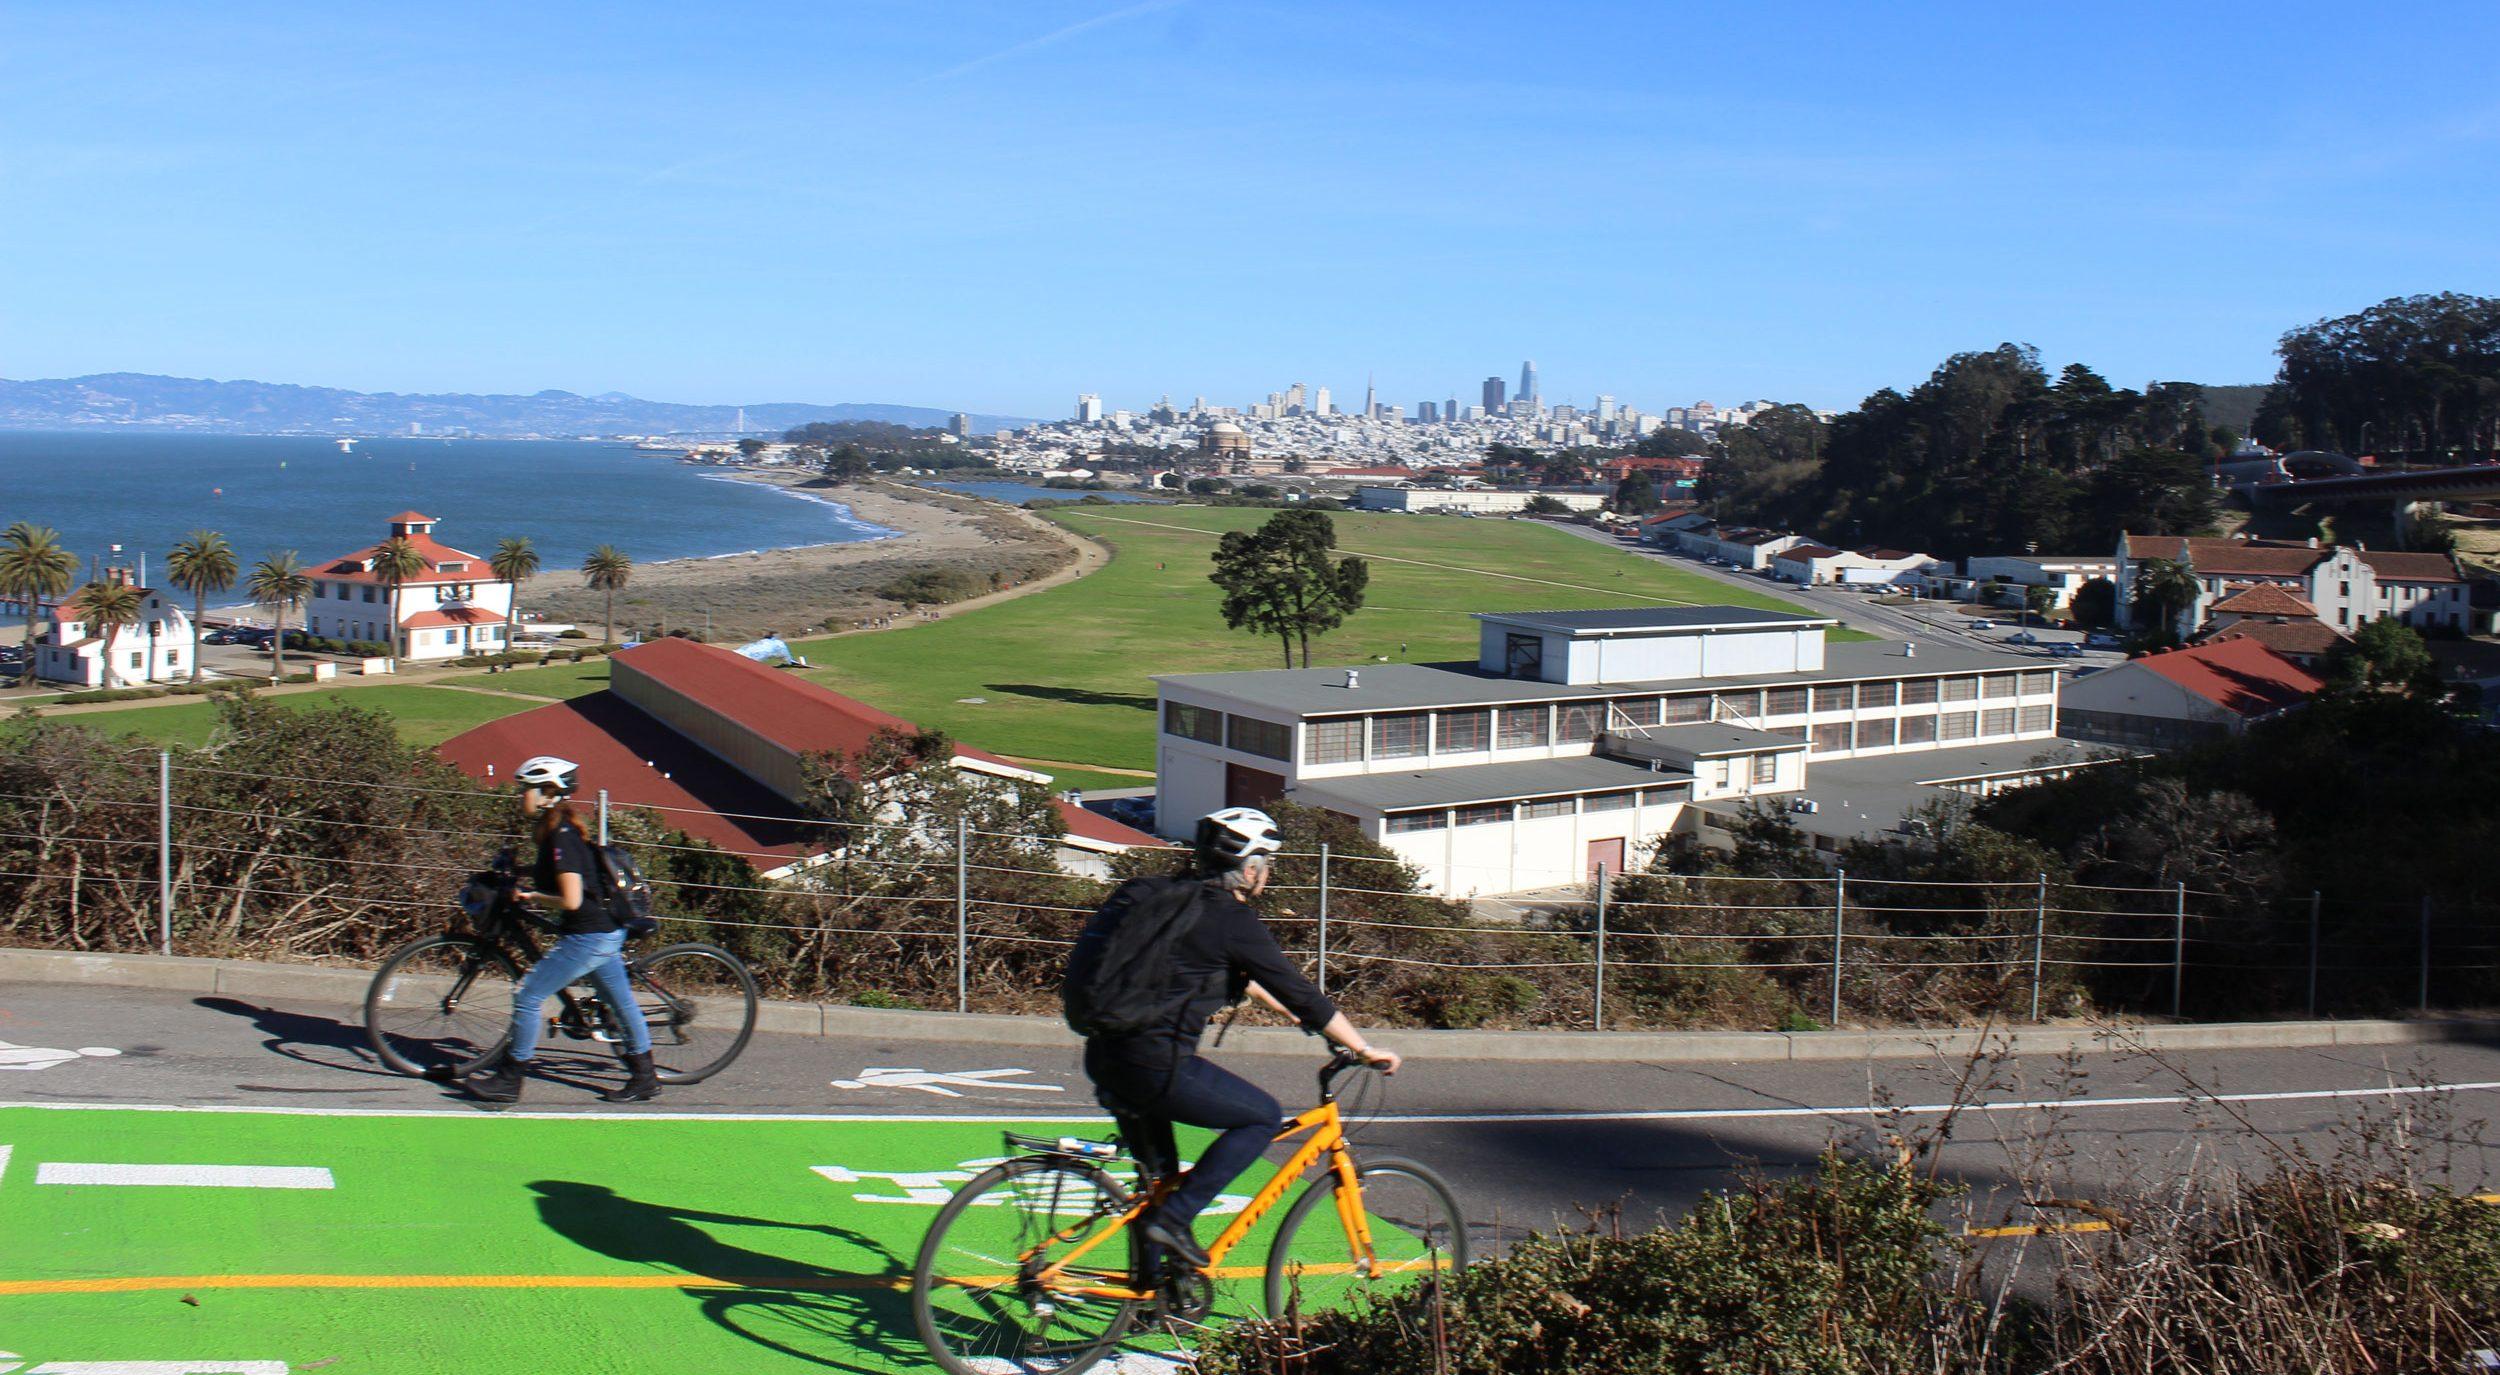 Bicyclists using trail with views of Crissy Field and city skyline in the background.